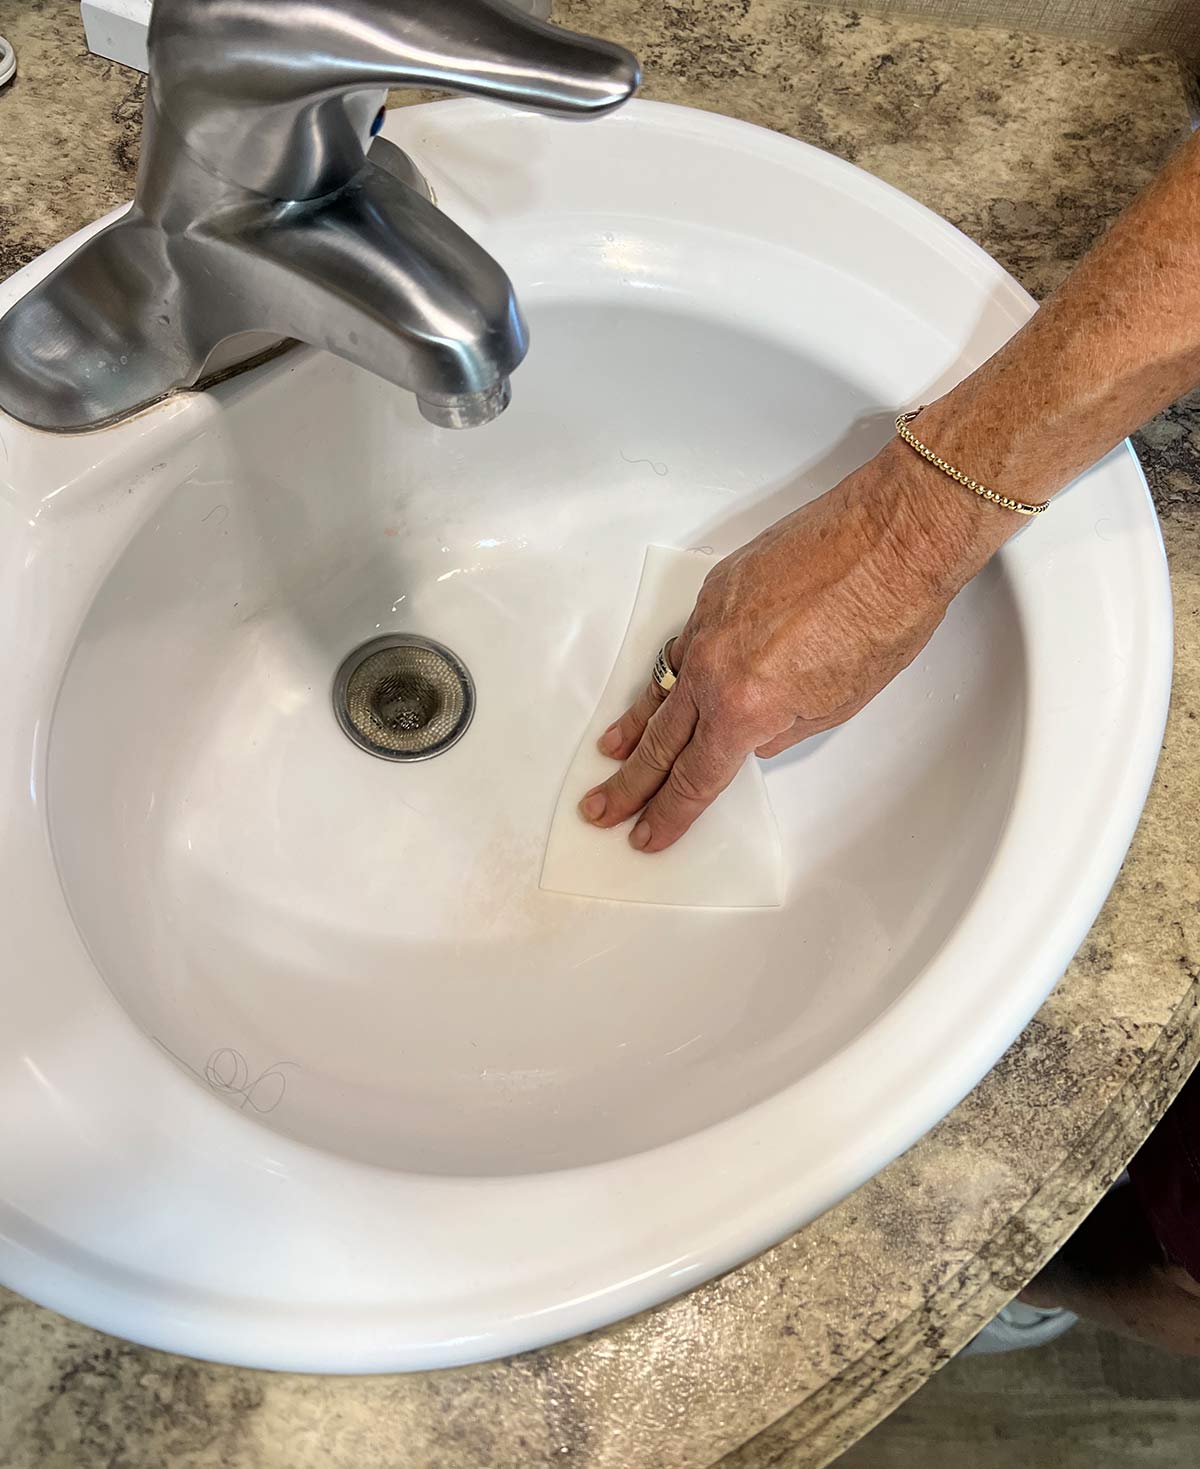 wiping down the sink